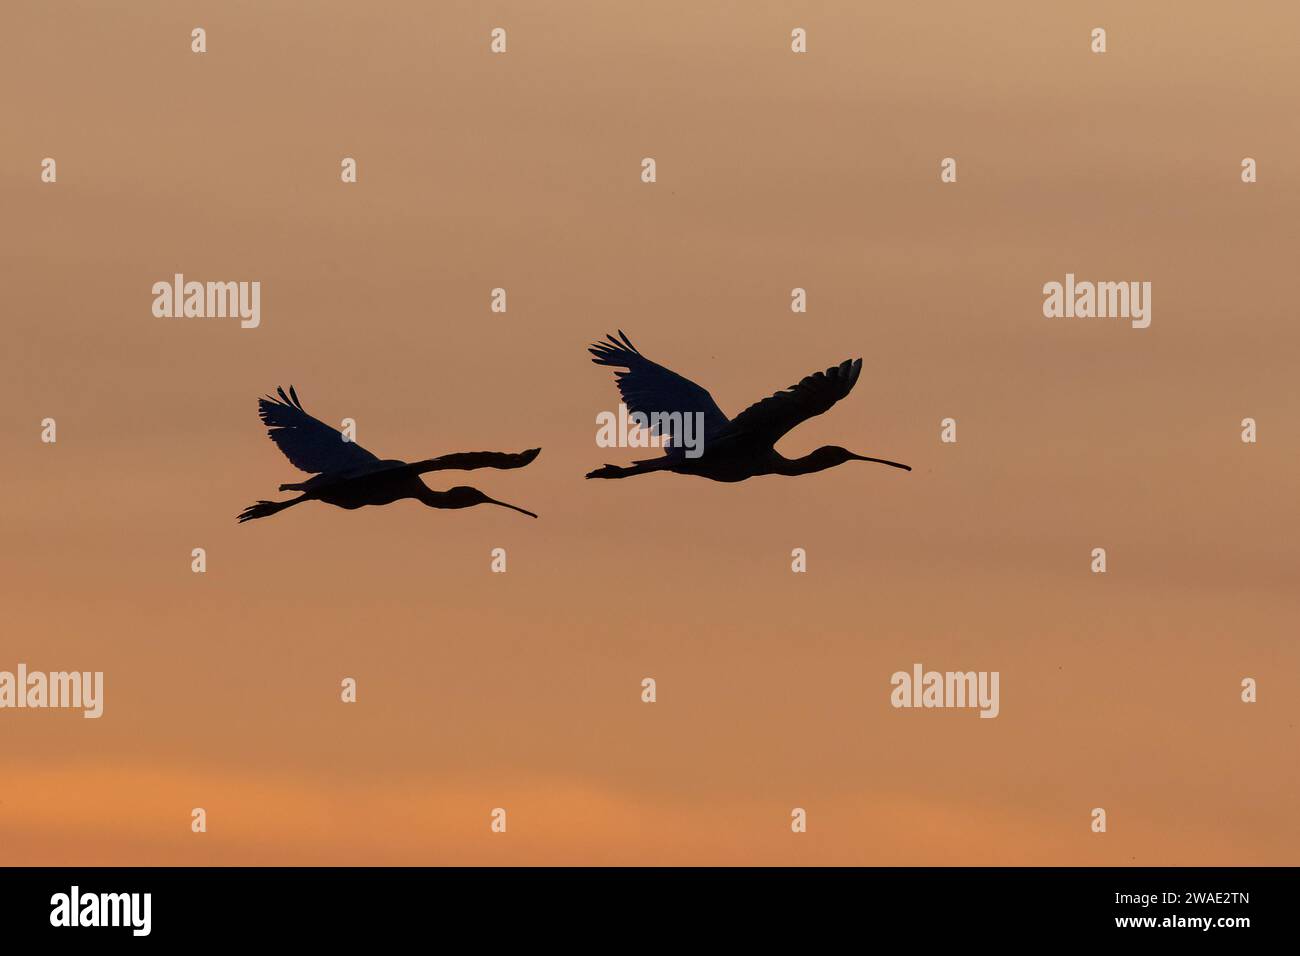 Silhouette of two Royal Spoonbills (Ardea alba) flying in the golden light at sunrise, Fogg Dam, Northern Territory, NT, Australia Stock Photo